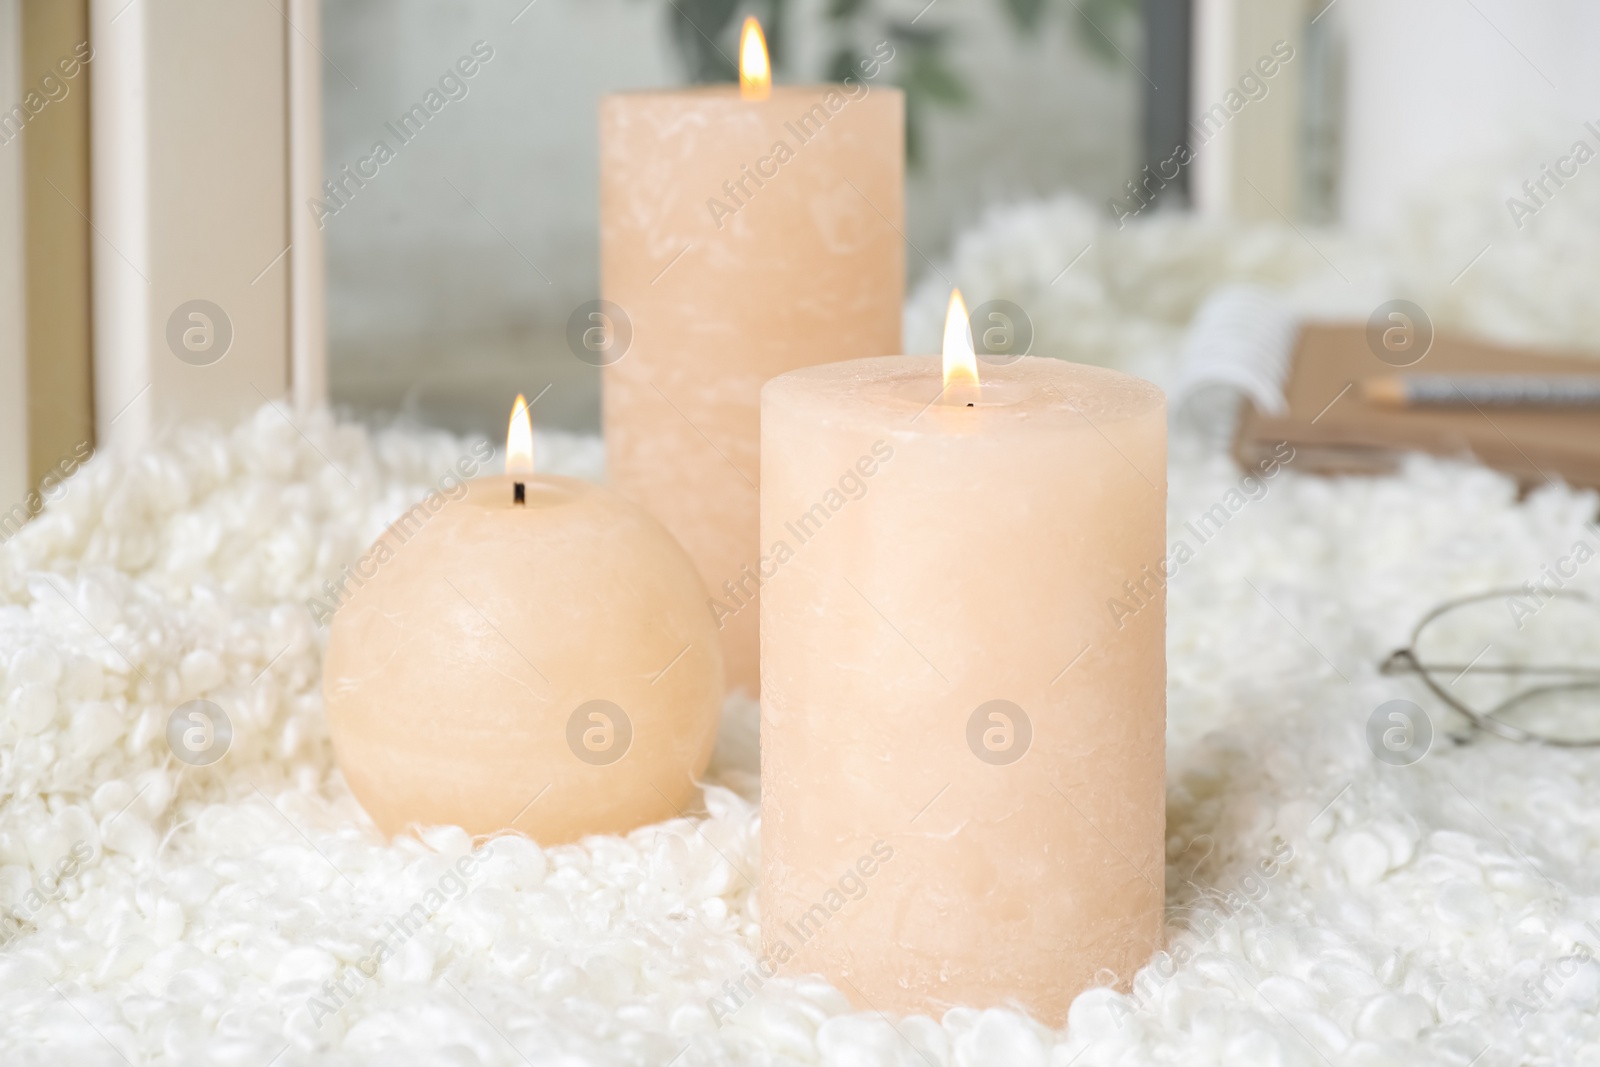 Photo of Burning wax candles on soft fabric indoors